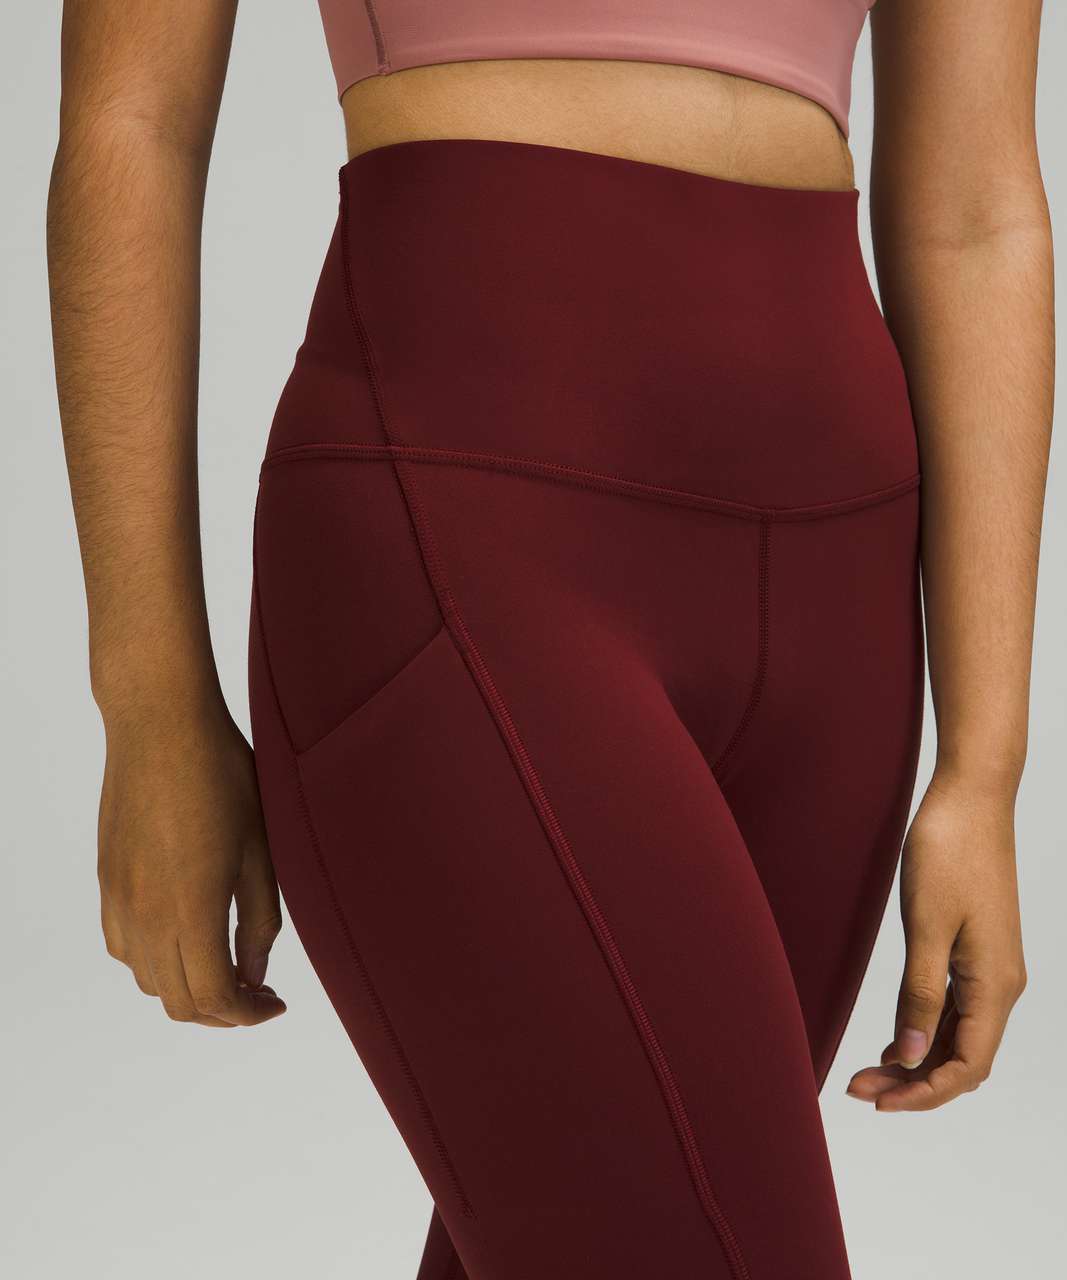 Lululemon Align High Rise Pant with Pockets 25 - Red Merlot